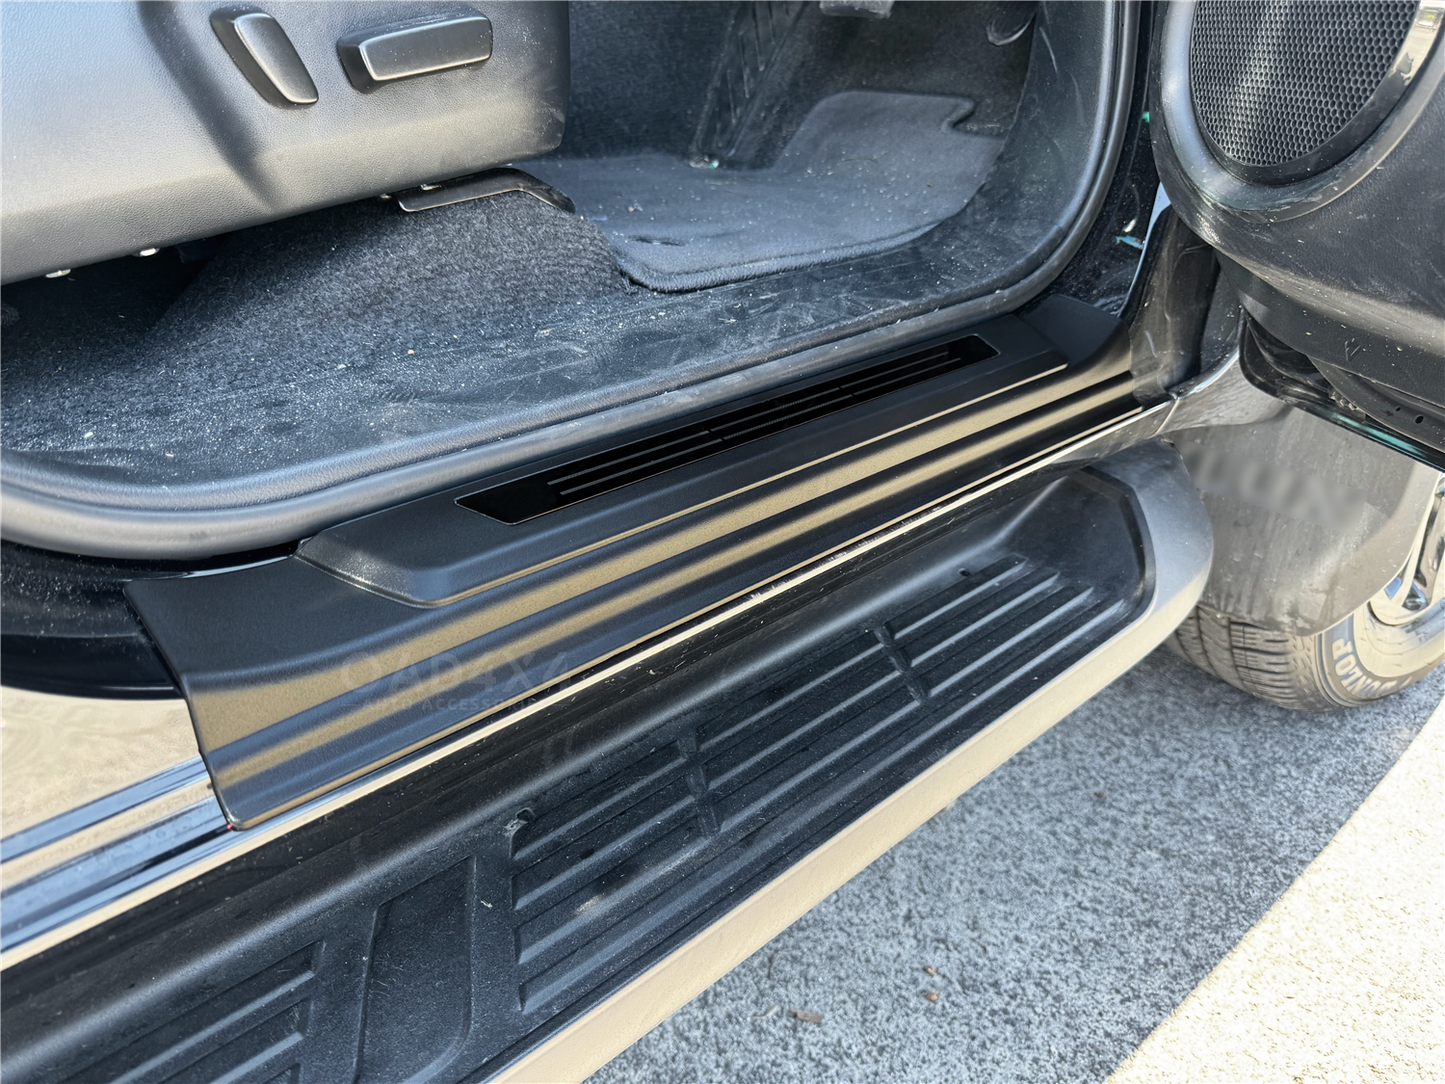 5D TPE Floor Mats & Black Door Sills Protector for Toyota Hilux Auto Dual Cab 2015-Onwards Tailored Door Sill Covered Floor Mat Liner + Stainless Steel Scuff Plates